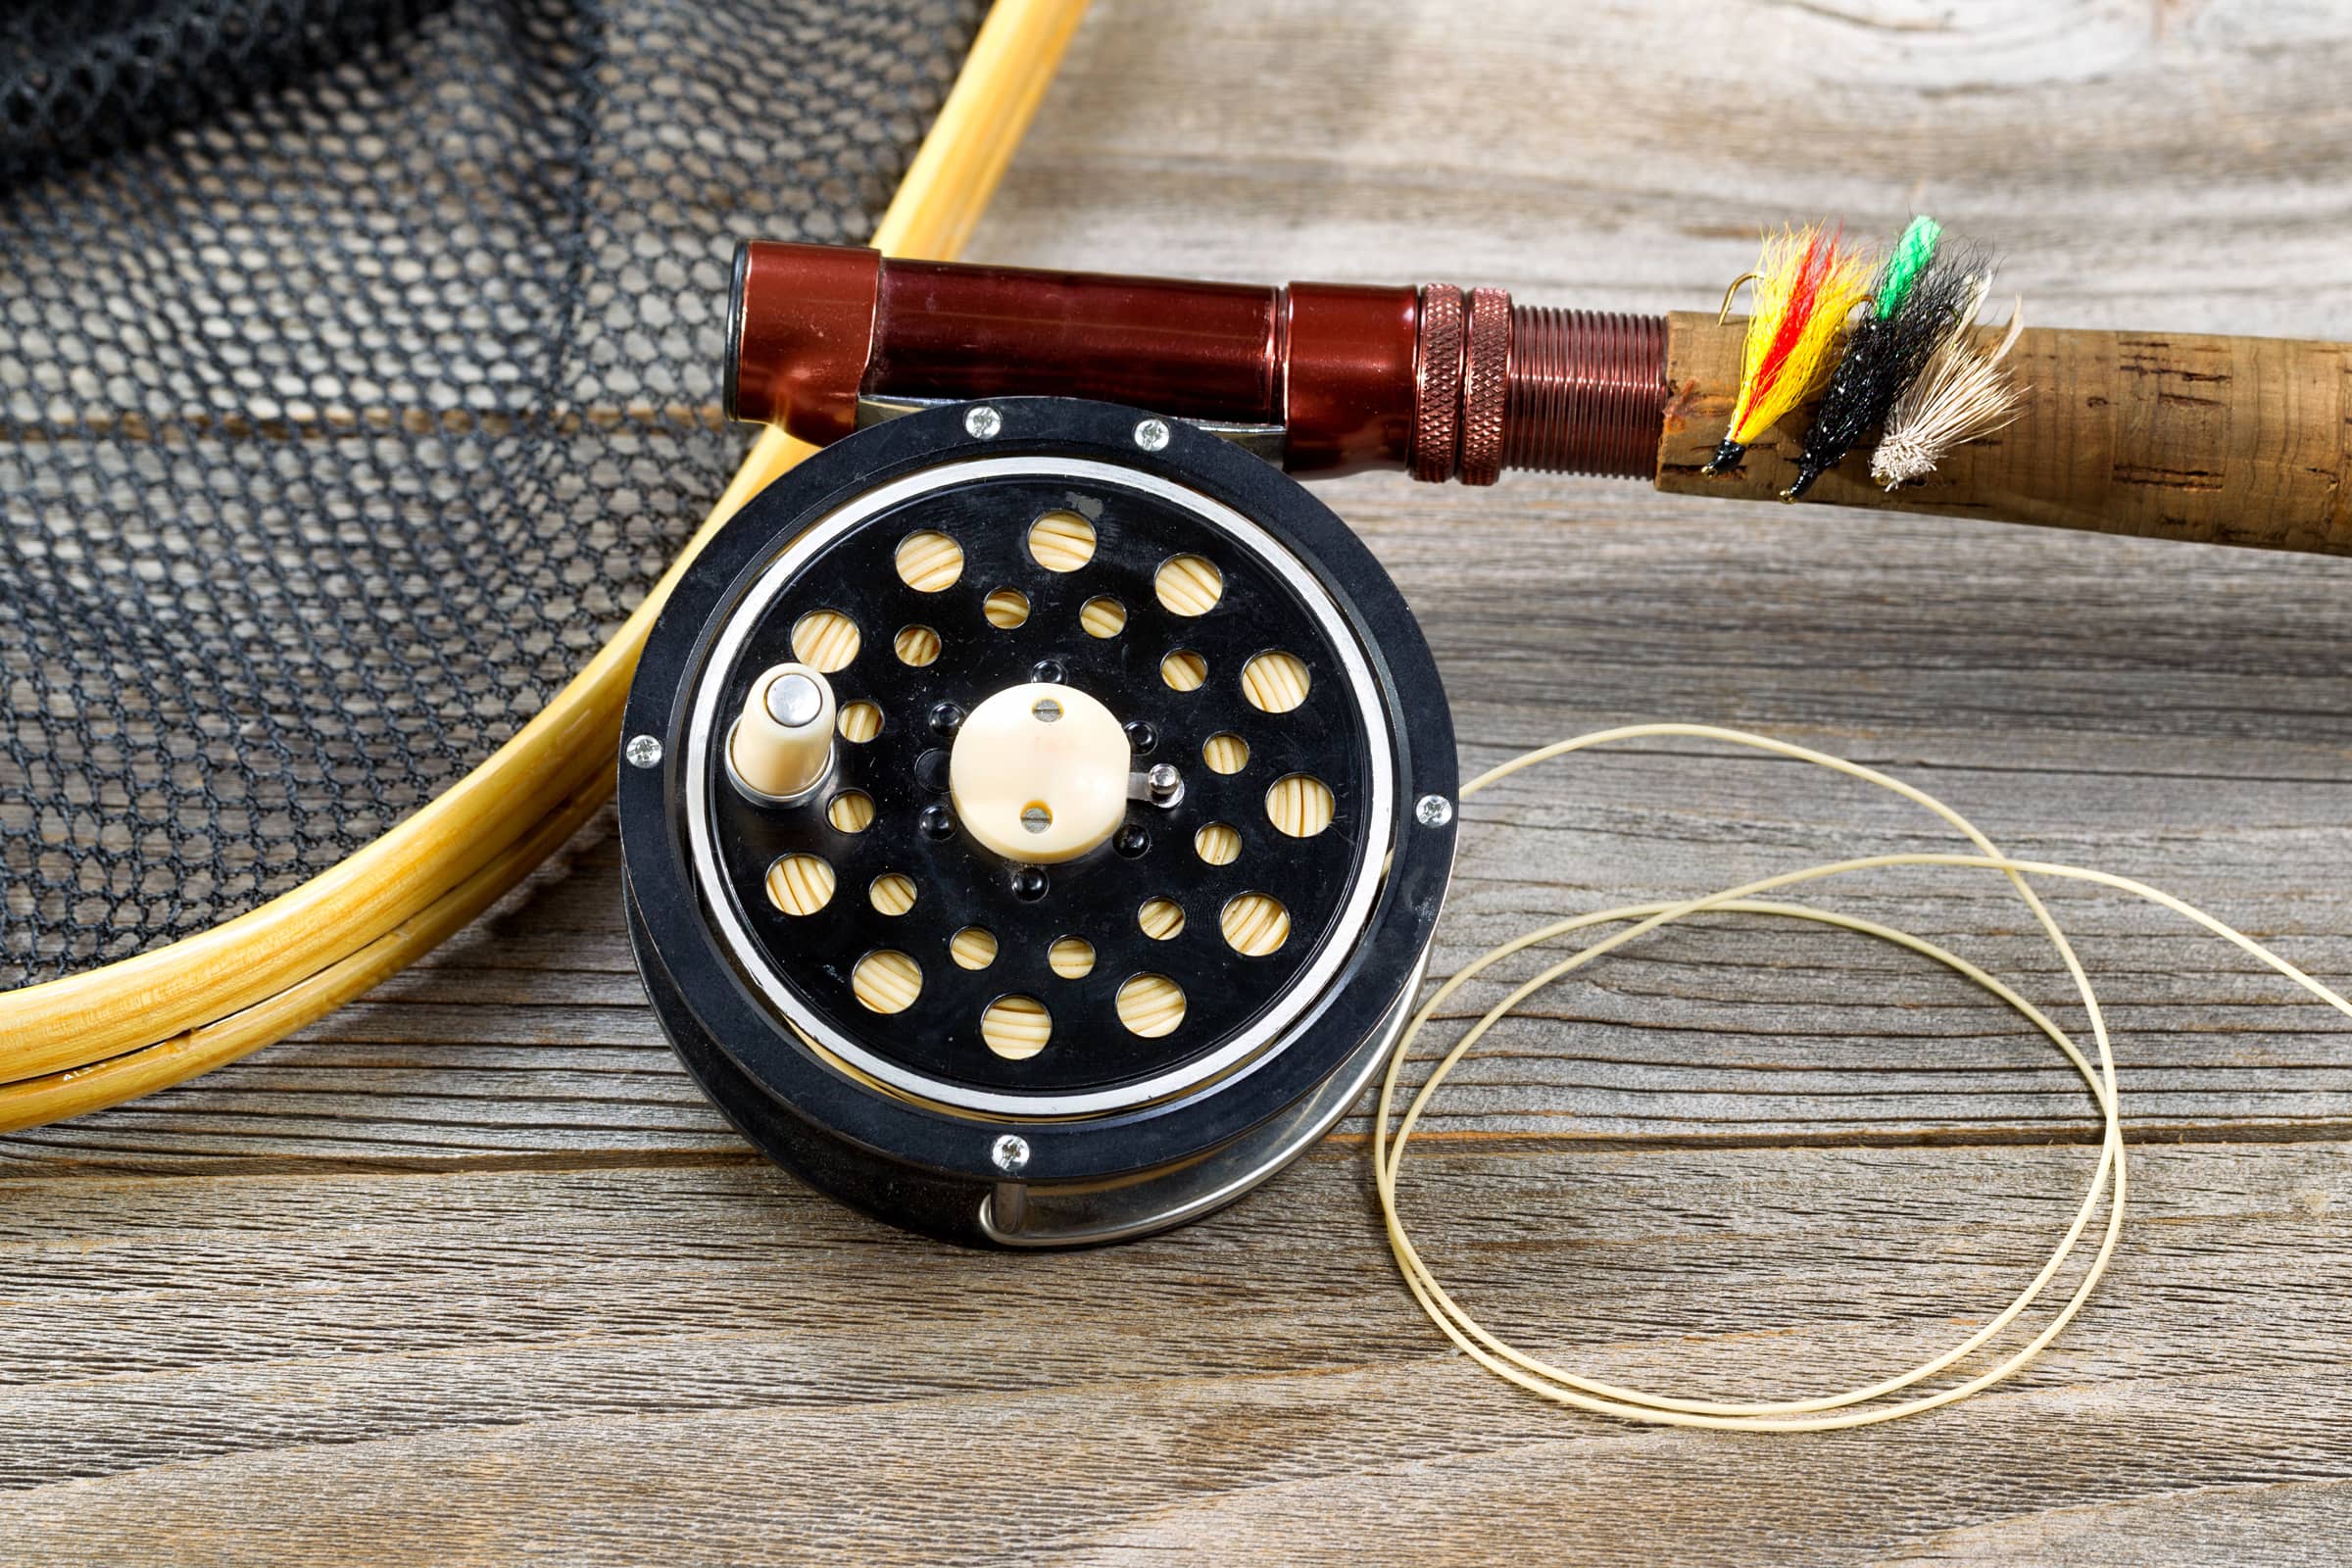 Best Fishing Line for Trout